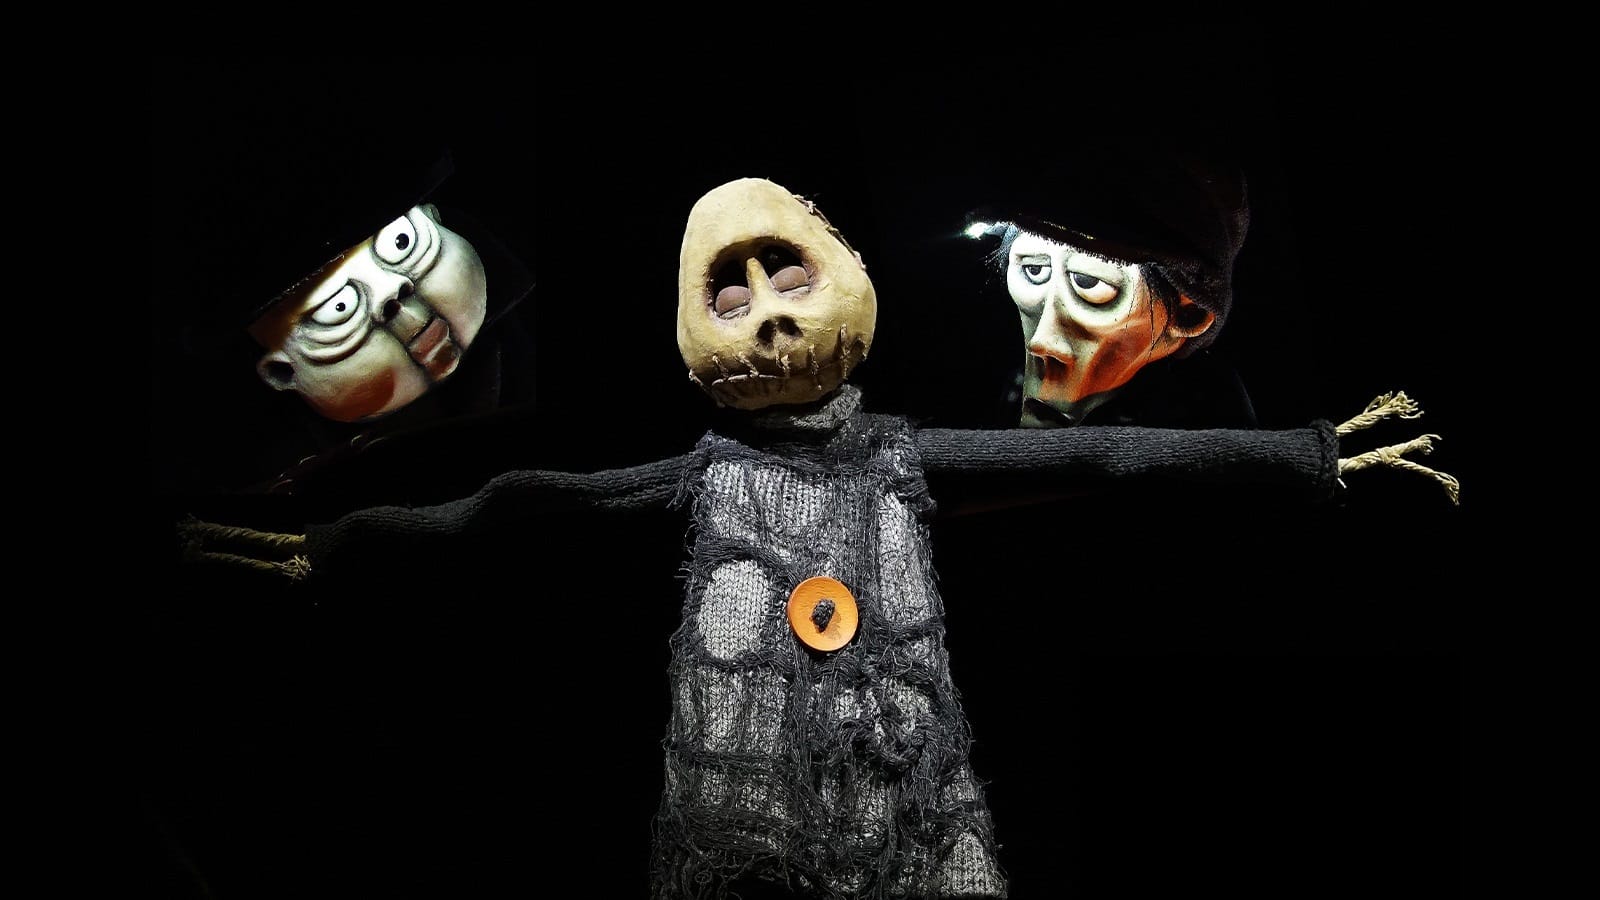 A scarecrow puppet looking down as two men puppets glare at it